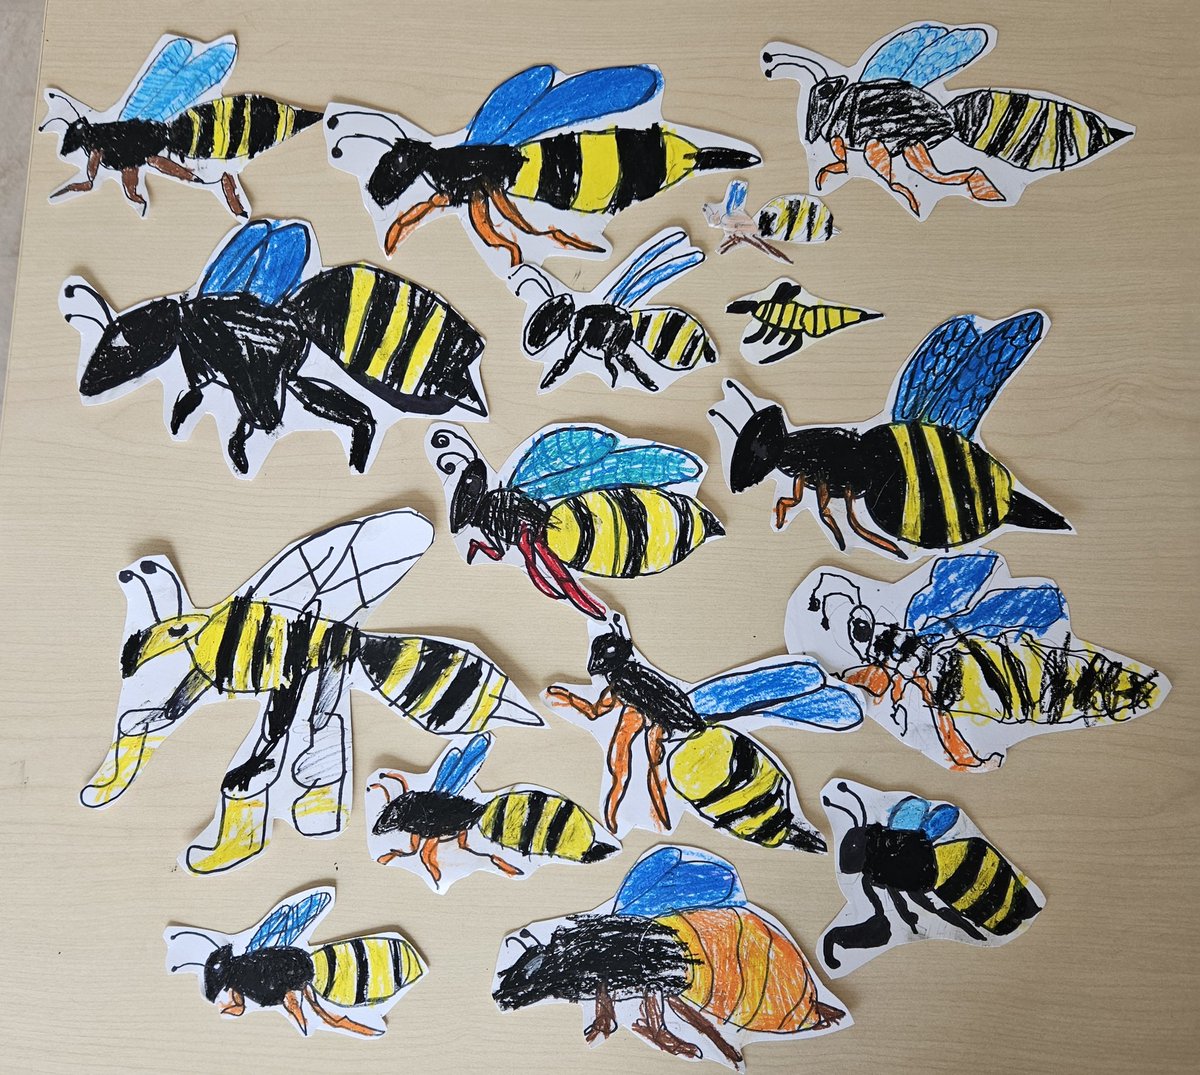 Art today was looking at the different parts that make up a bee. Seeing those different shapes come together to form the body.